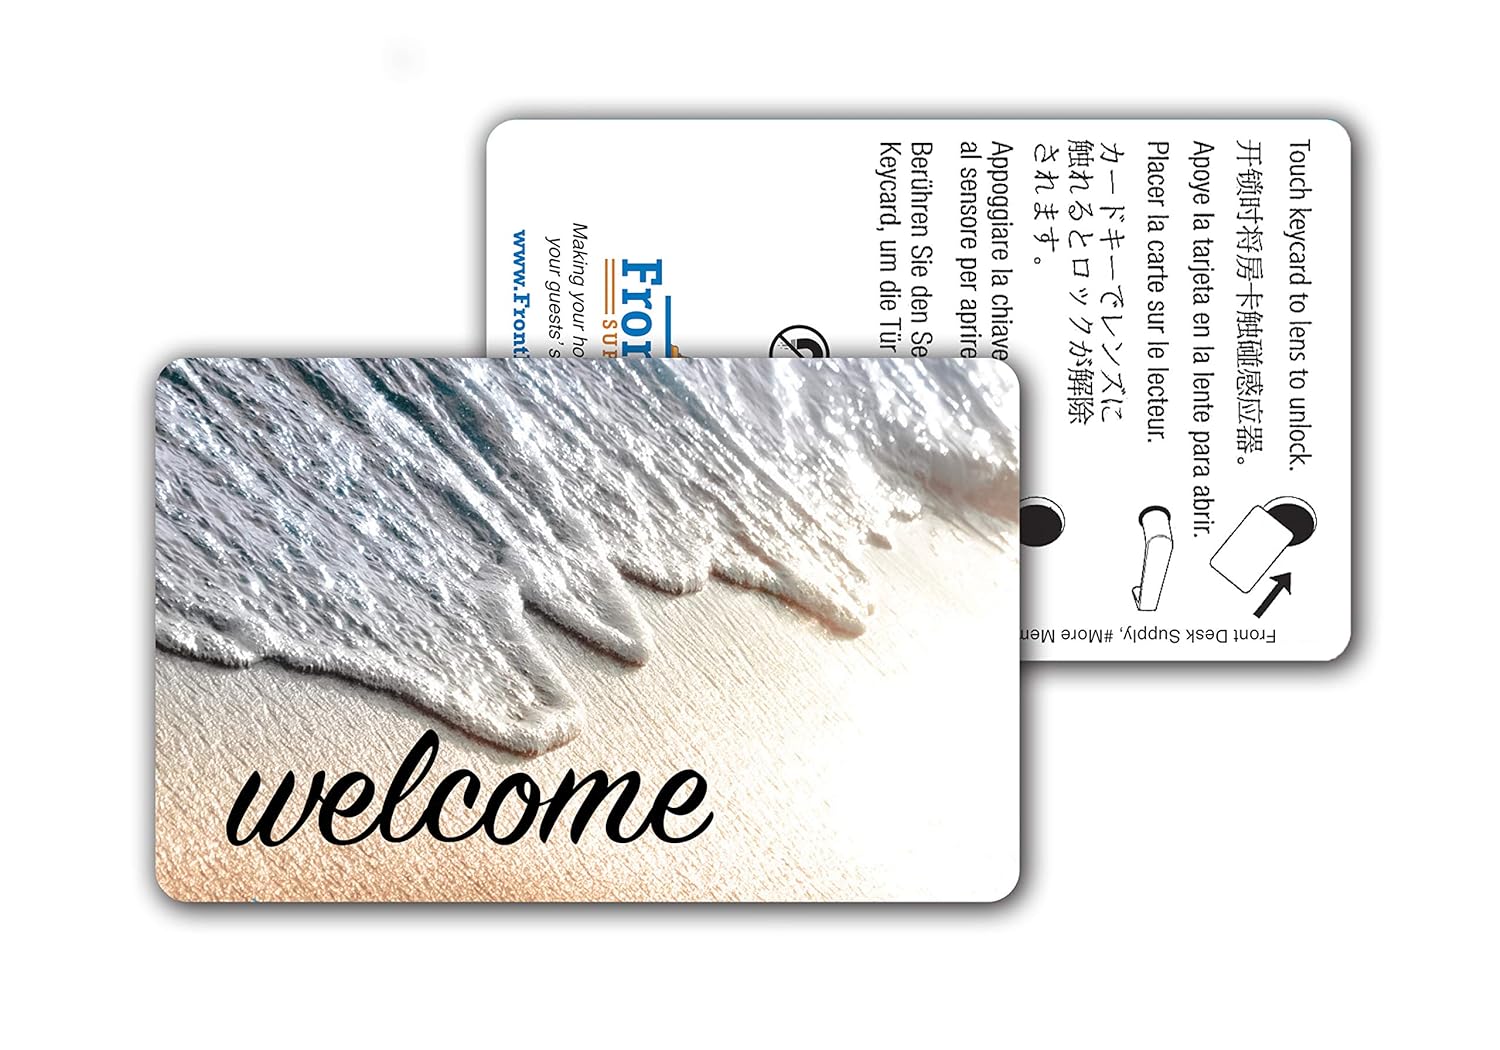 MF1K RFID Key Cards for Hotel and Motel Welcome Room Key Relaxing Beach Design (Set of 500)